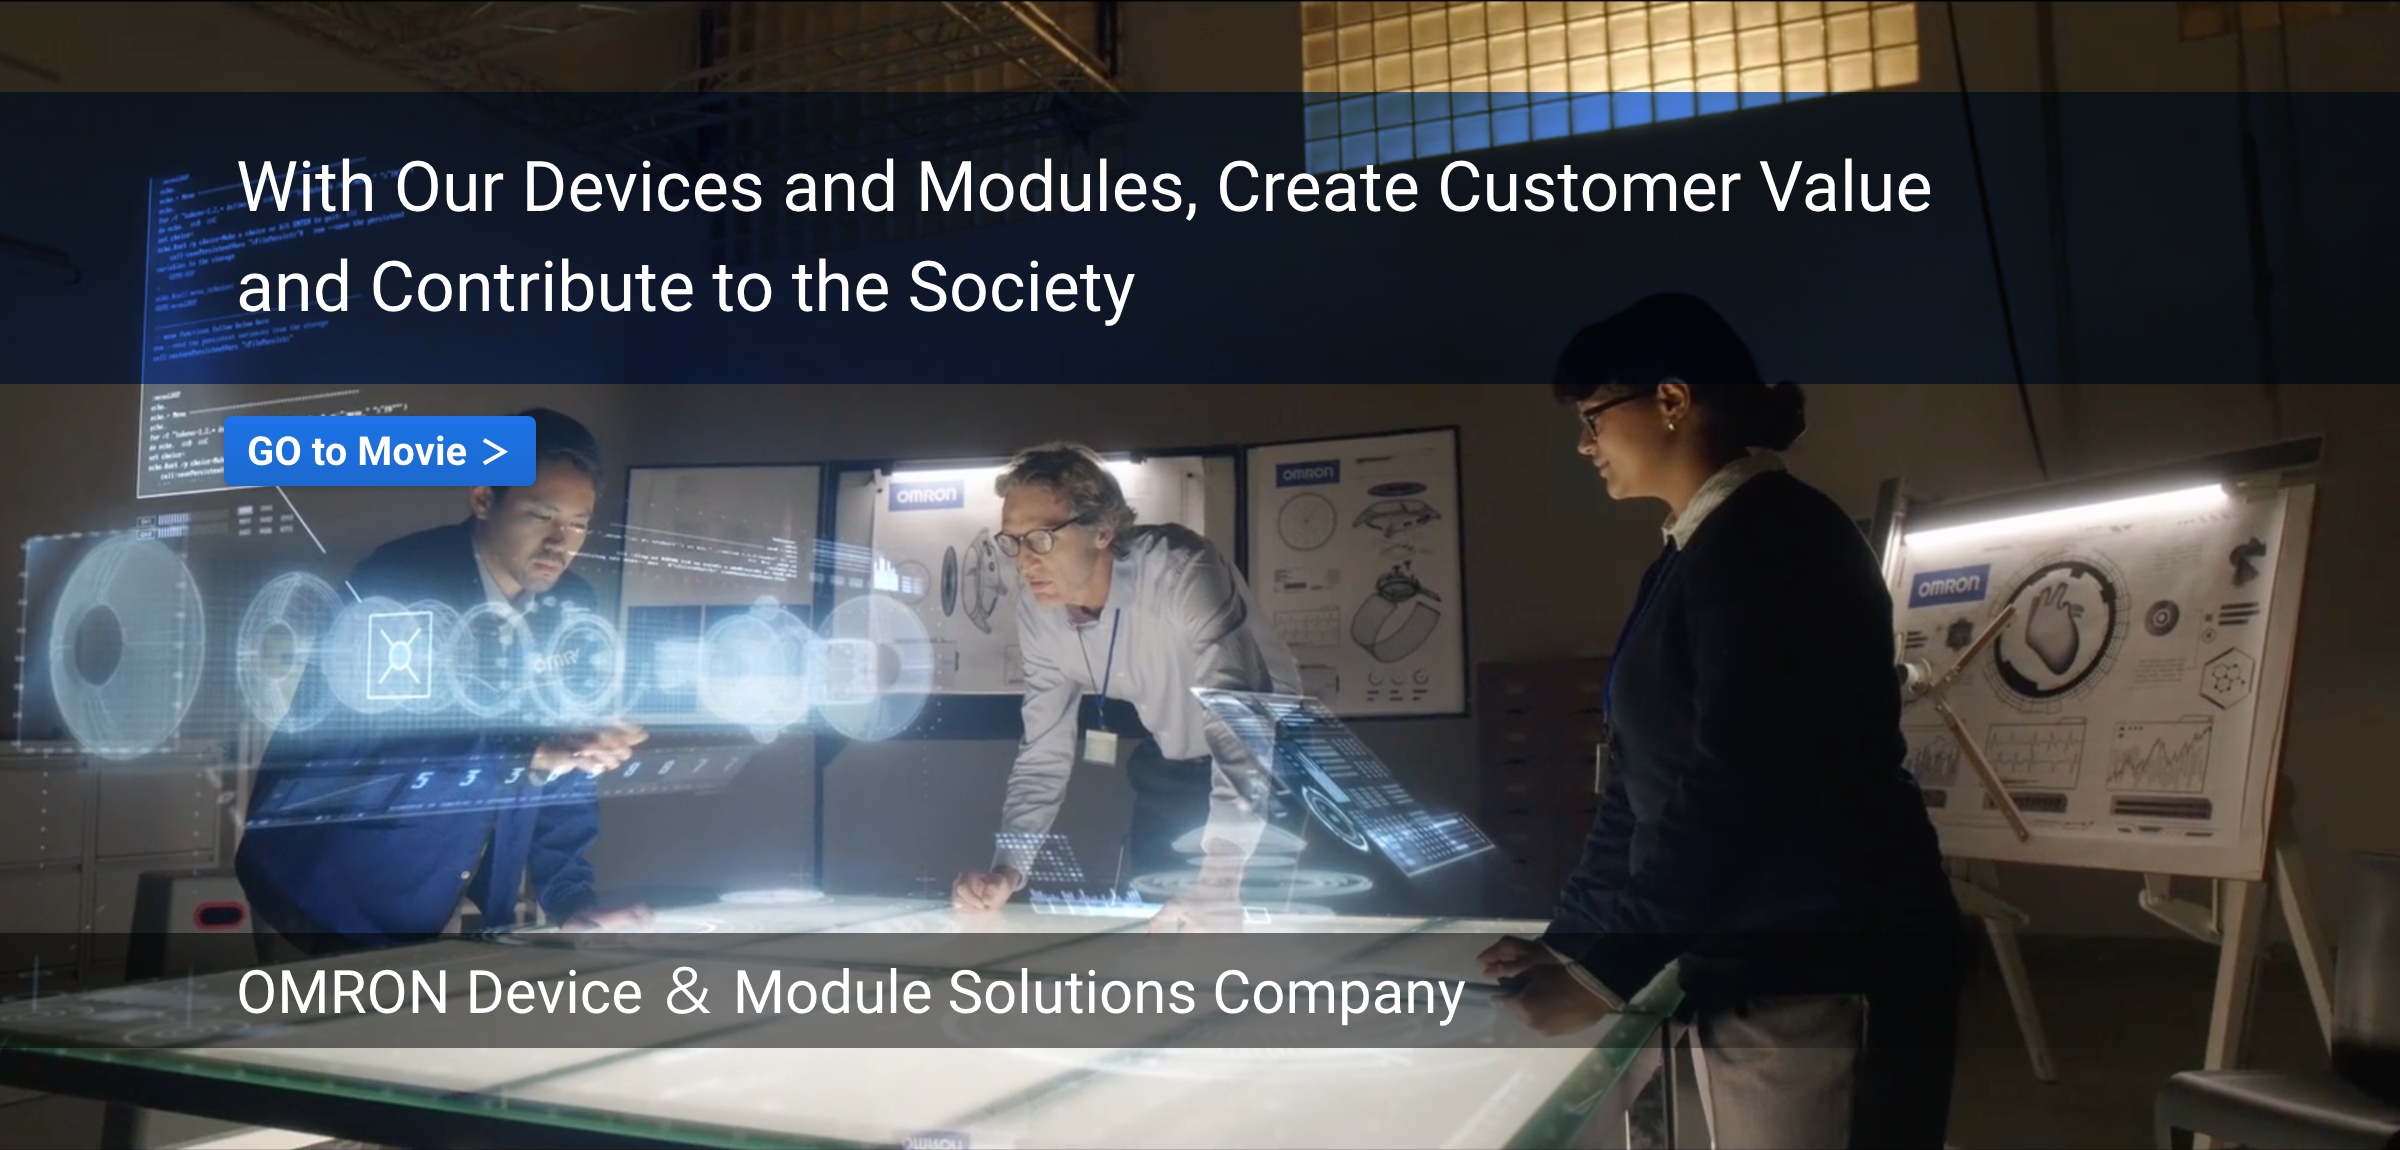 With Our Devices and Modules, Create Customer Value and Contribute to the Society : OMRON Device ＆ Module Solutions Company : GO to Movie